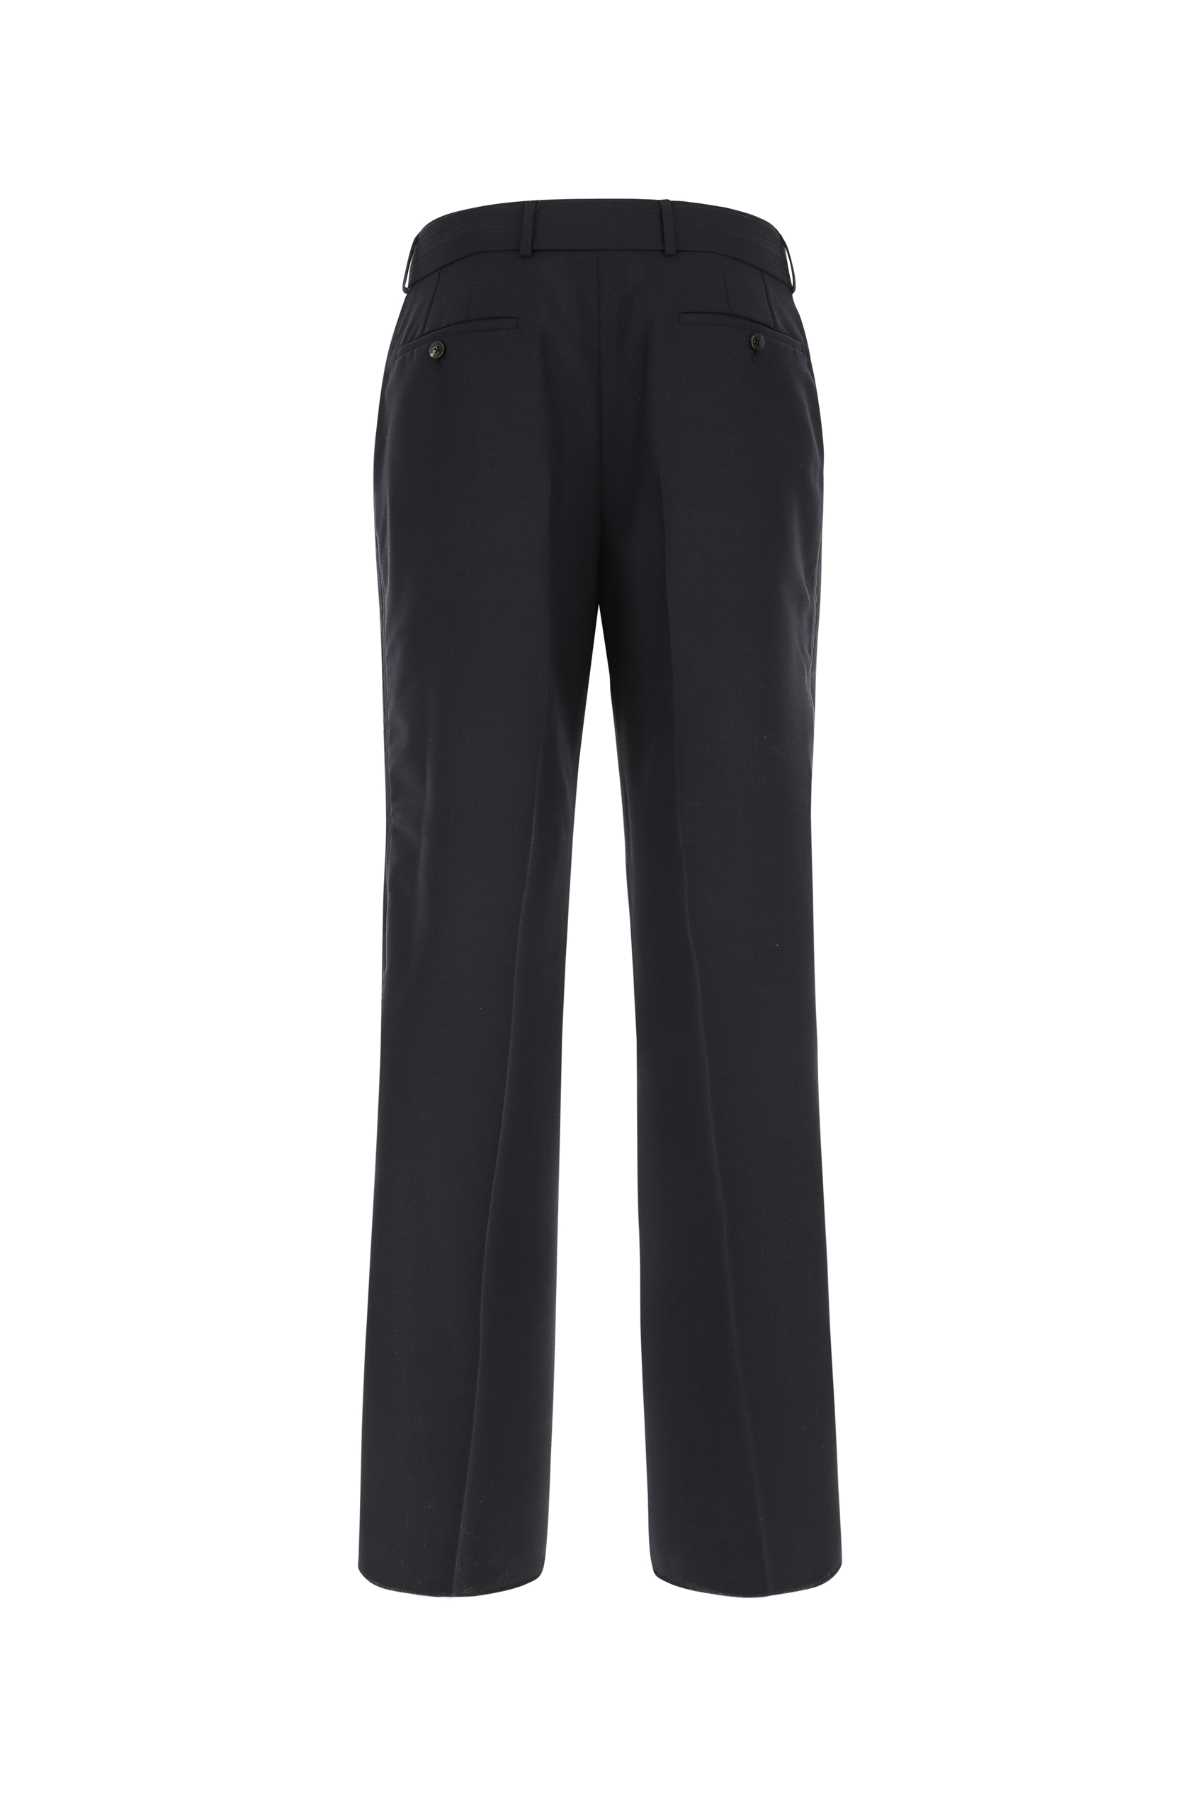 Lanvin Midnight Blue Wool Blend Pant In 291